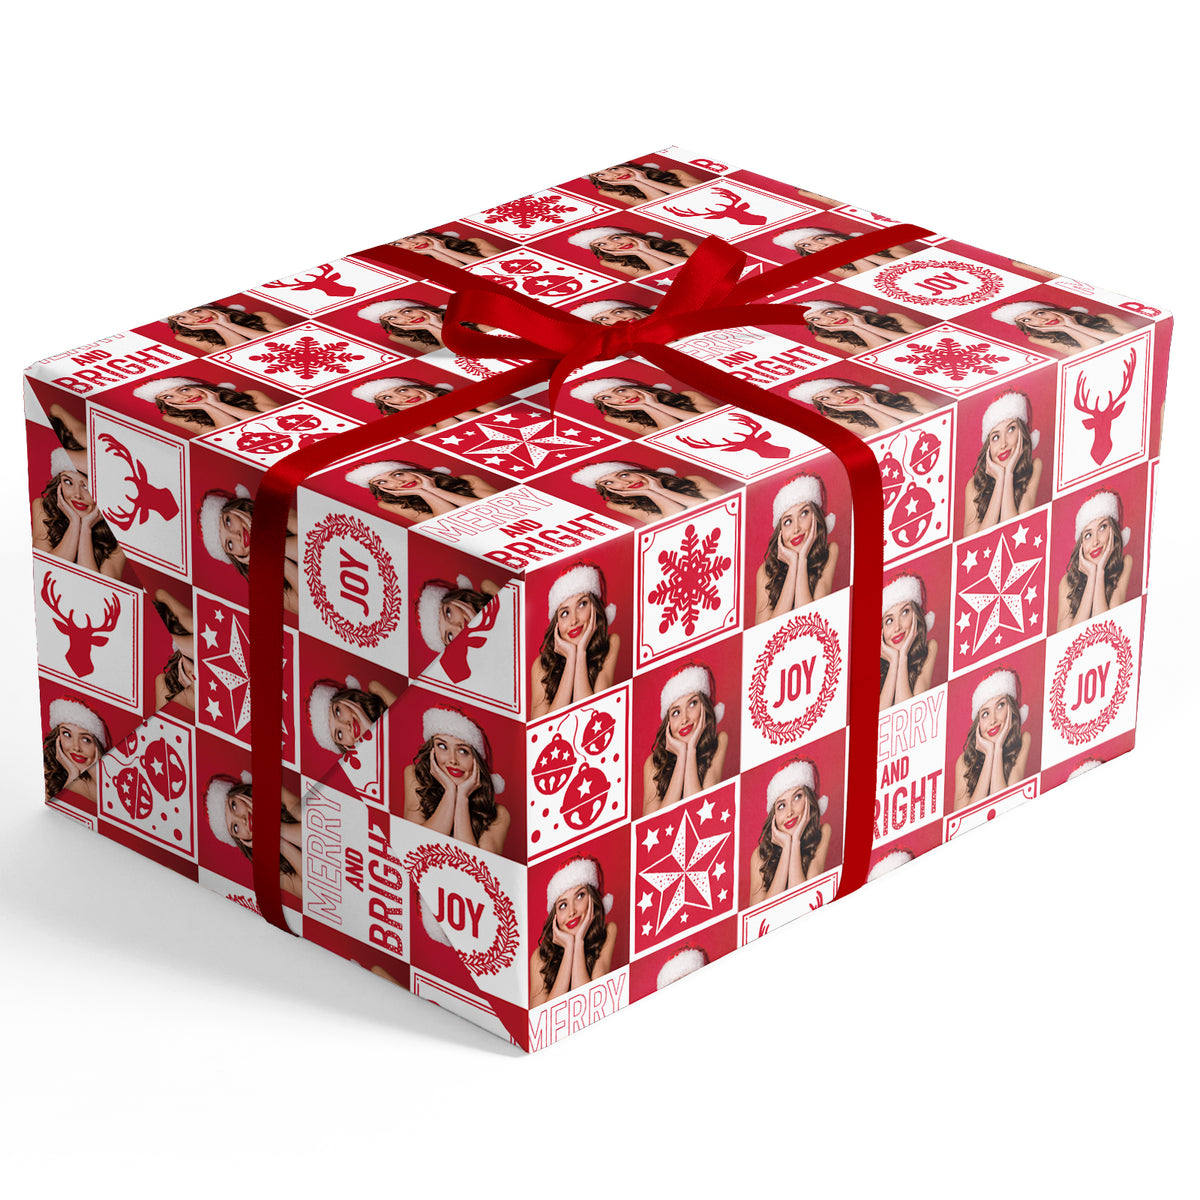 Personalised Customised Gift Wrapping Paper Christmas Gift 